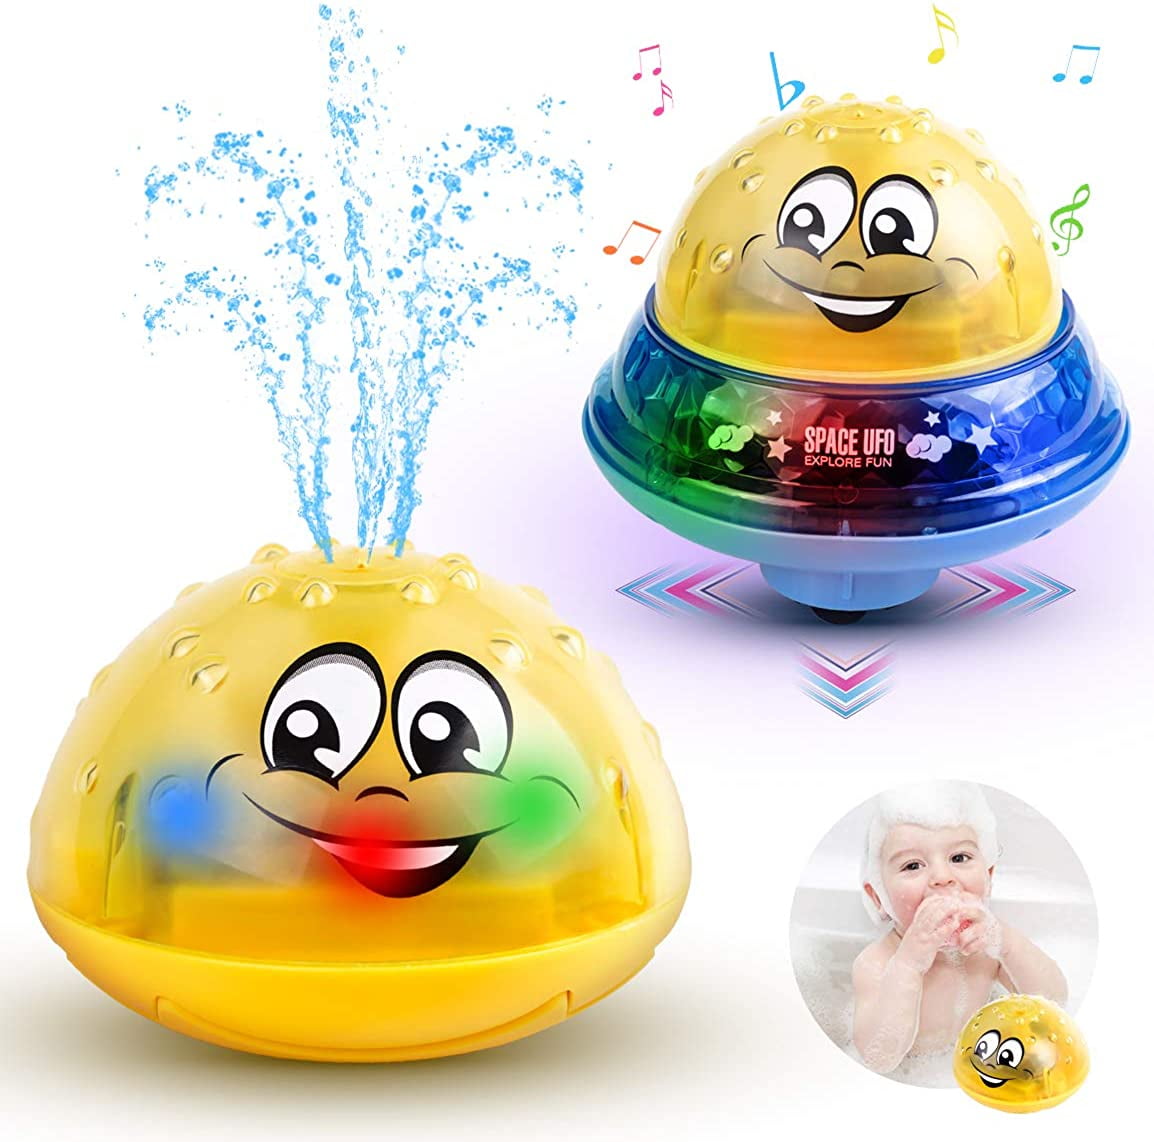 Space UFO Car Toys With LED Light Up Float Toys Bathtub Shower Pool Bathroom Toy for Baby Toddler Infant Kid 2 in 1 Spray Water Squirt Toy Sammious Bath Toy